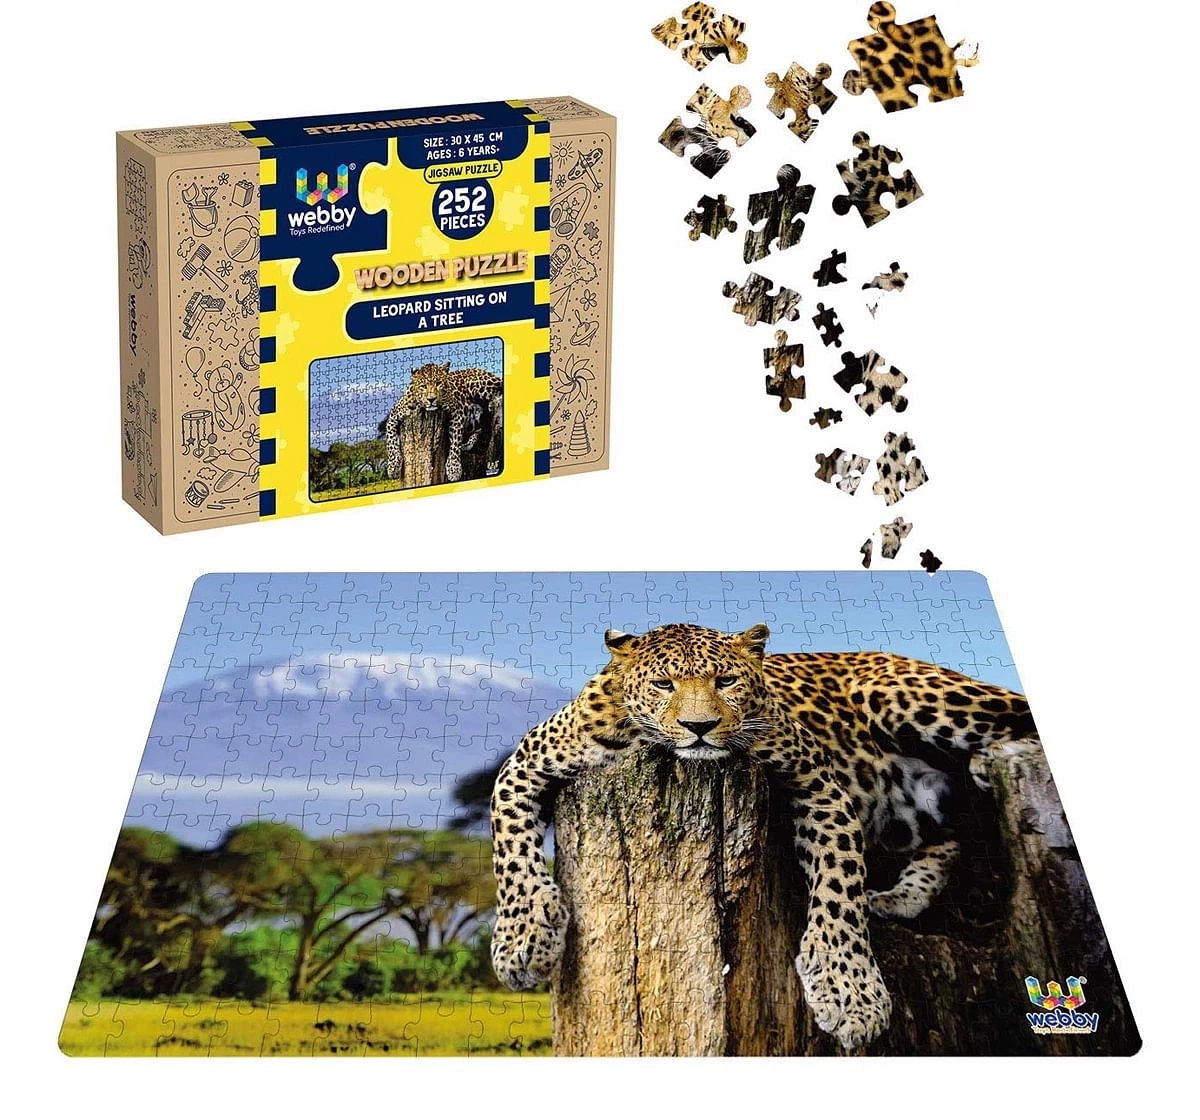 Webby Leopard Sitting 252 Pieces Wooden Puzzle for Kids 6Y+